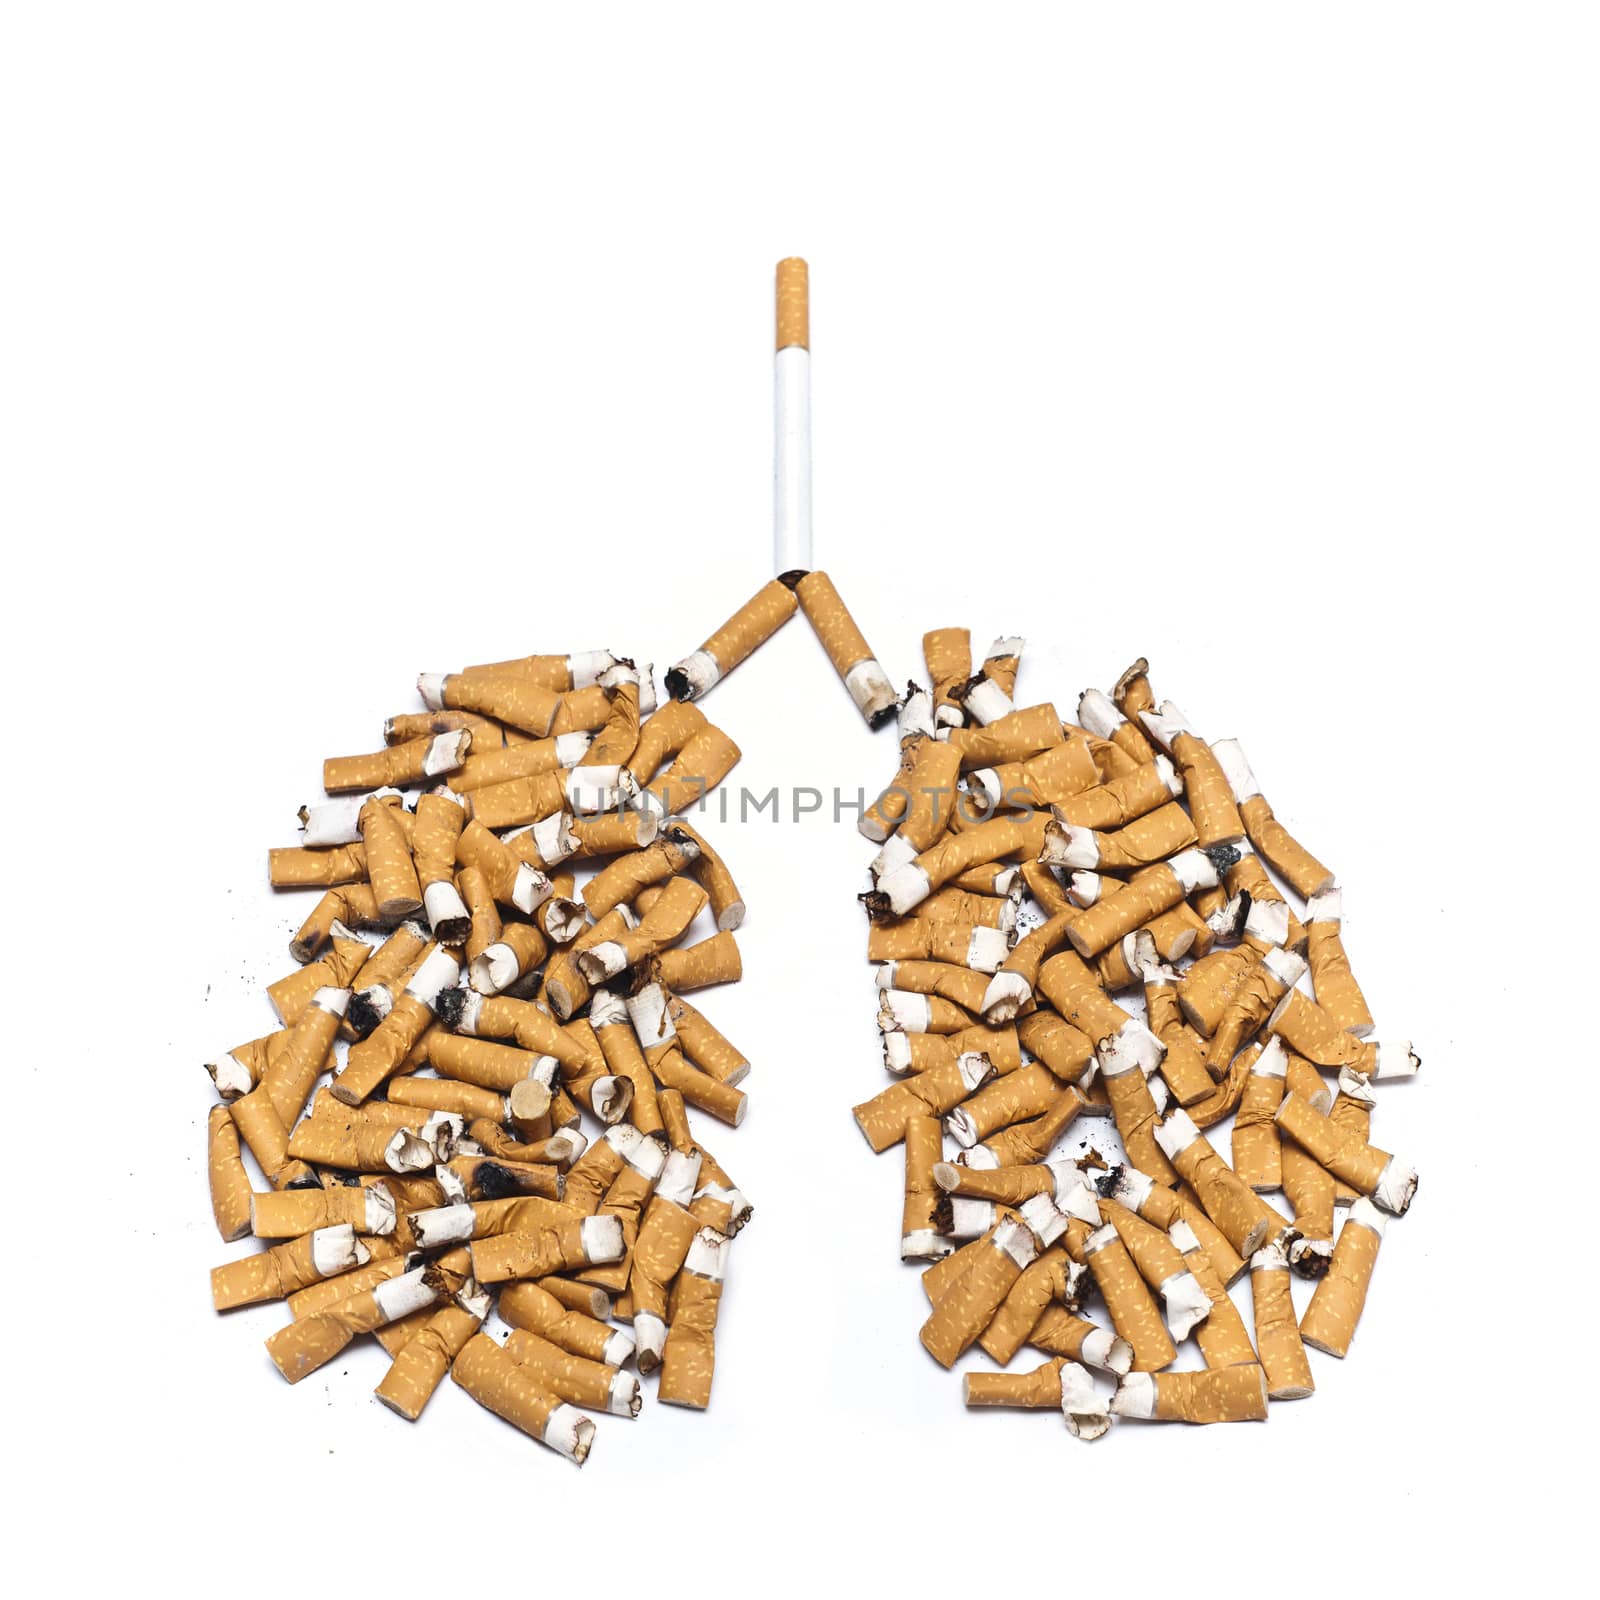 Concept danger cigarettes for lungs by NeydtStock